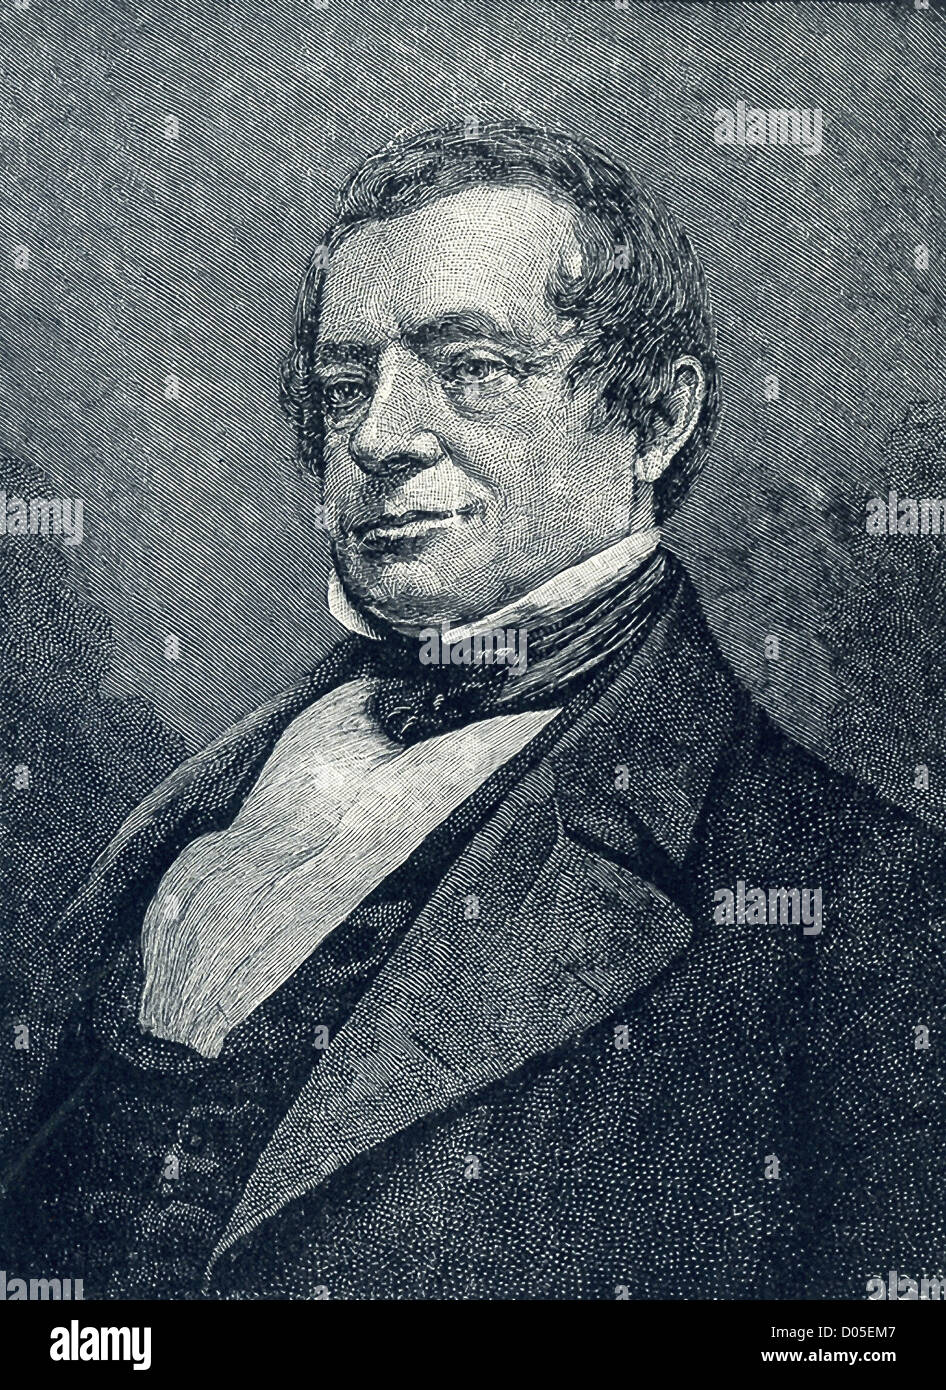 Washington Irving (1783-1859) was an American author, best known for  Rip Van Winkle and The Legend of Sleepy Hollow. Stock Photo